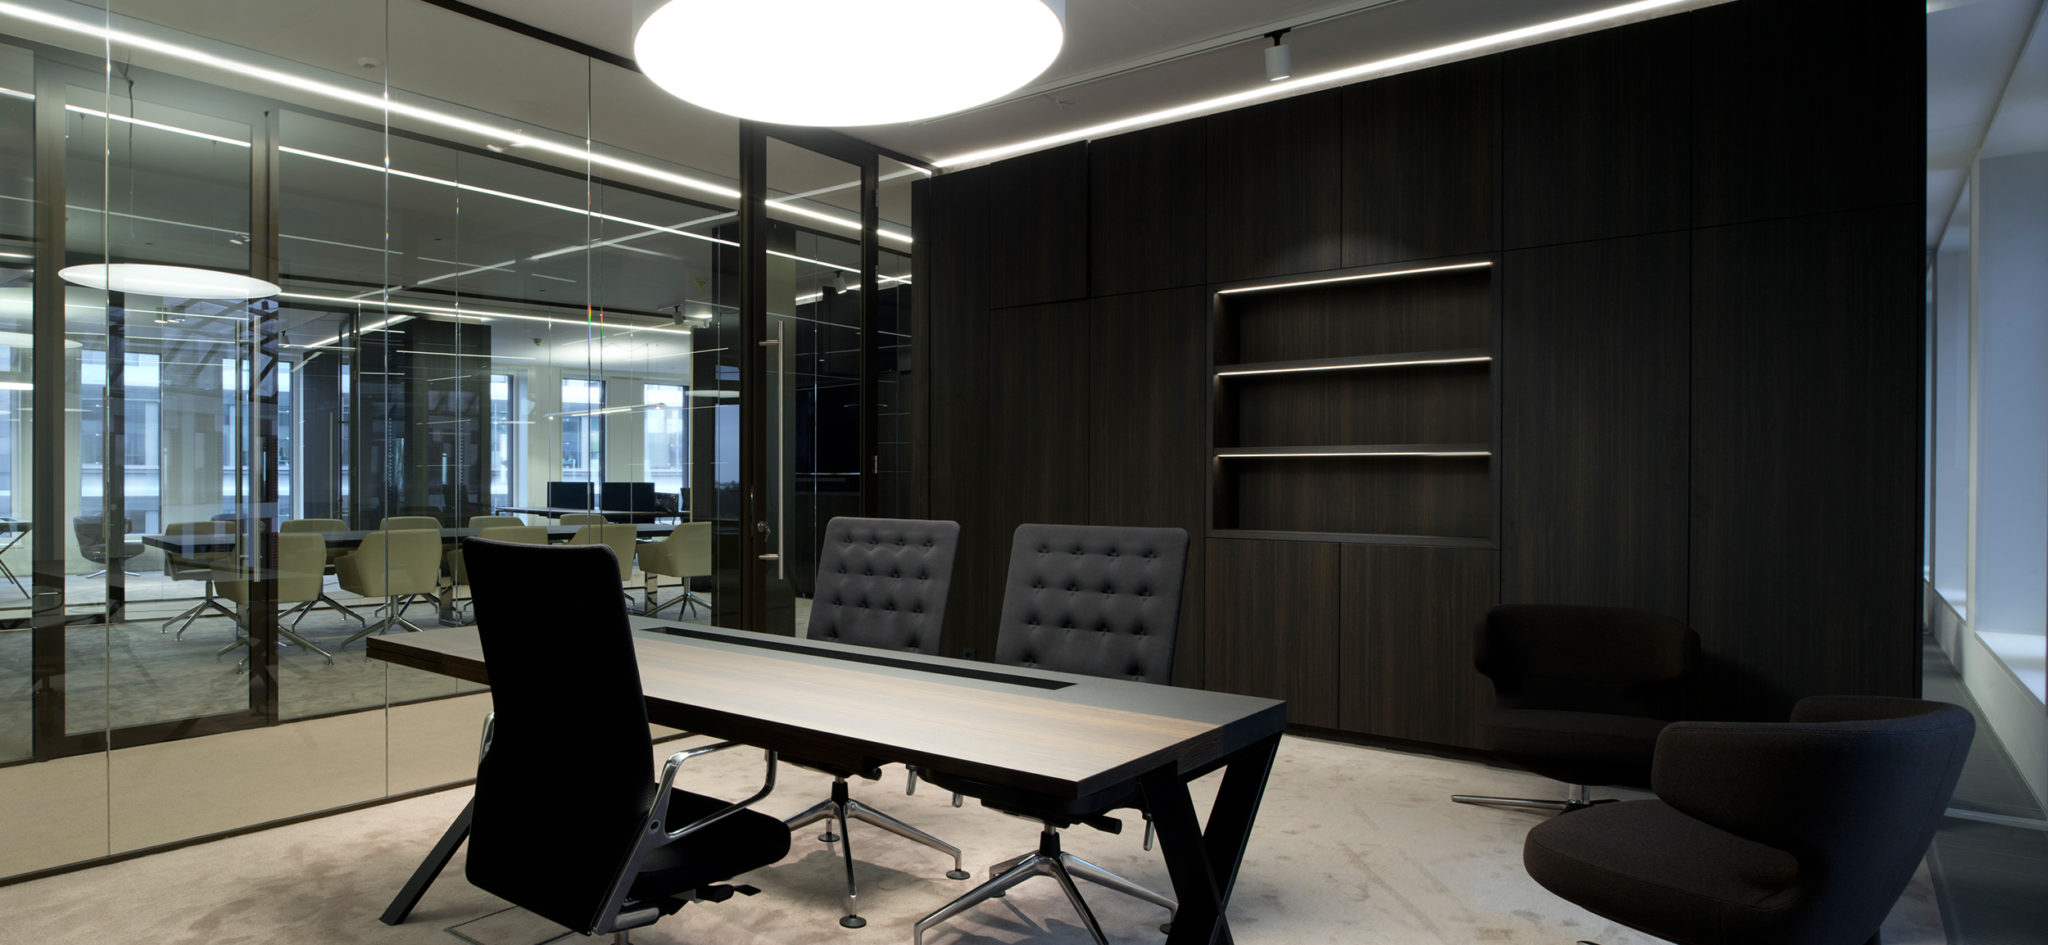 Custom furniture for an office in Luxembourg, JFPE - 